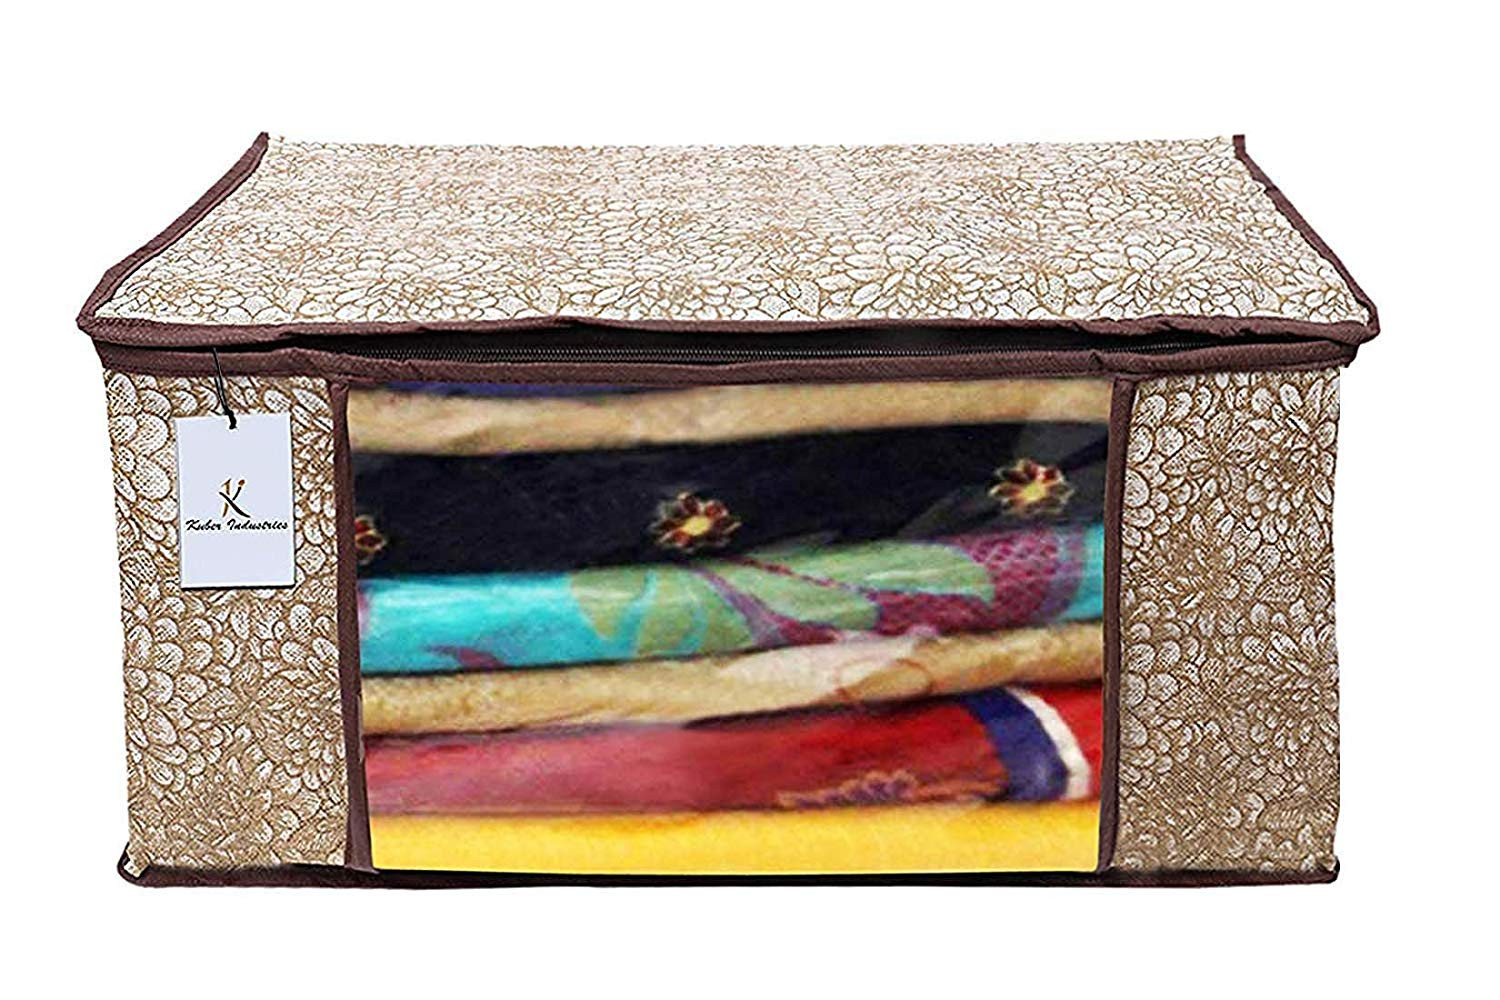 Kuber Industries Metalic Printed Non Woven Fabric Saree Cover Set with Transparent Window, Extra Large, Ivory Red & Golden Brown -CTKTC40771